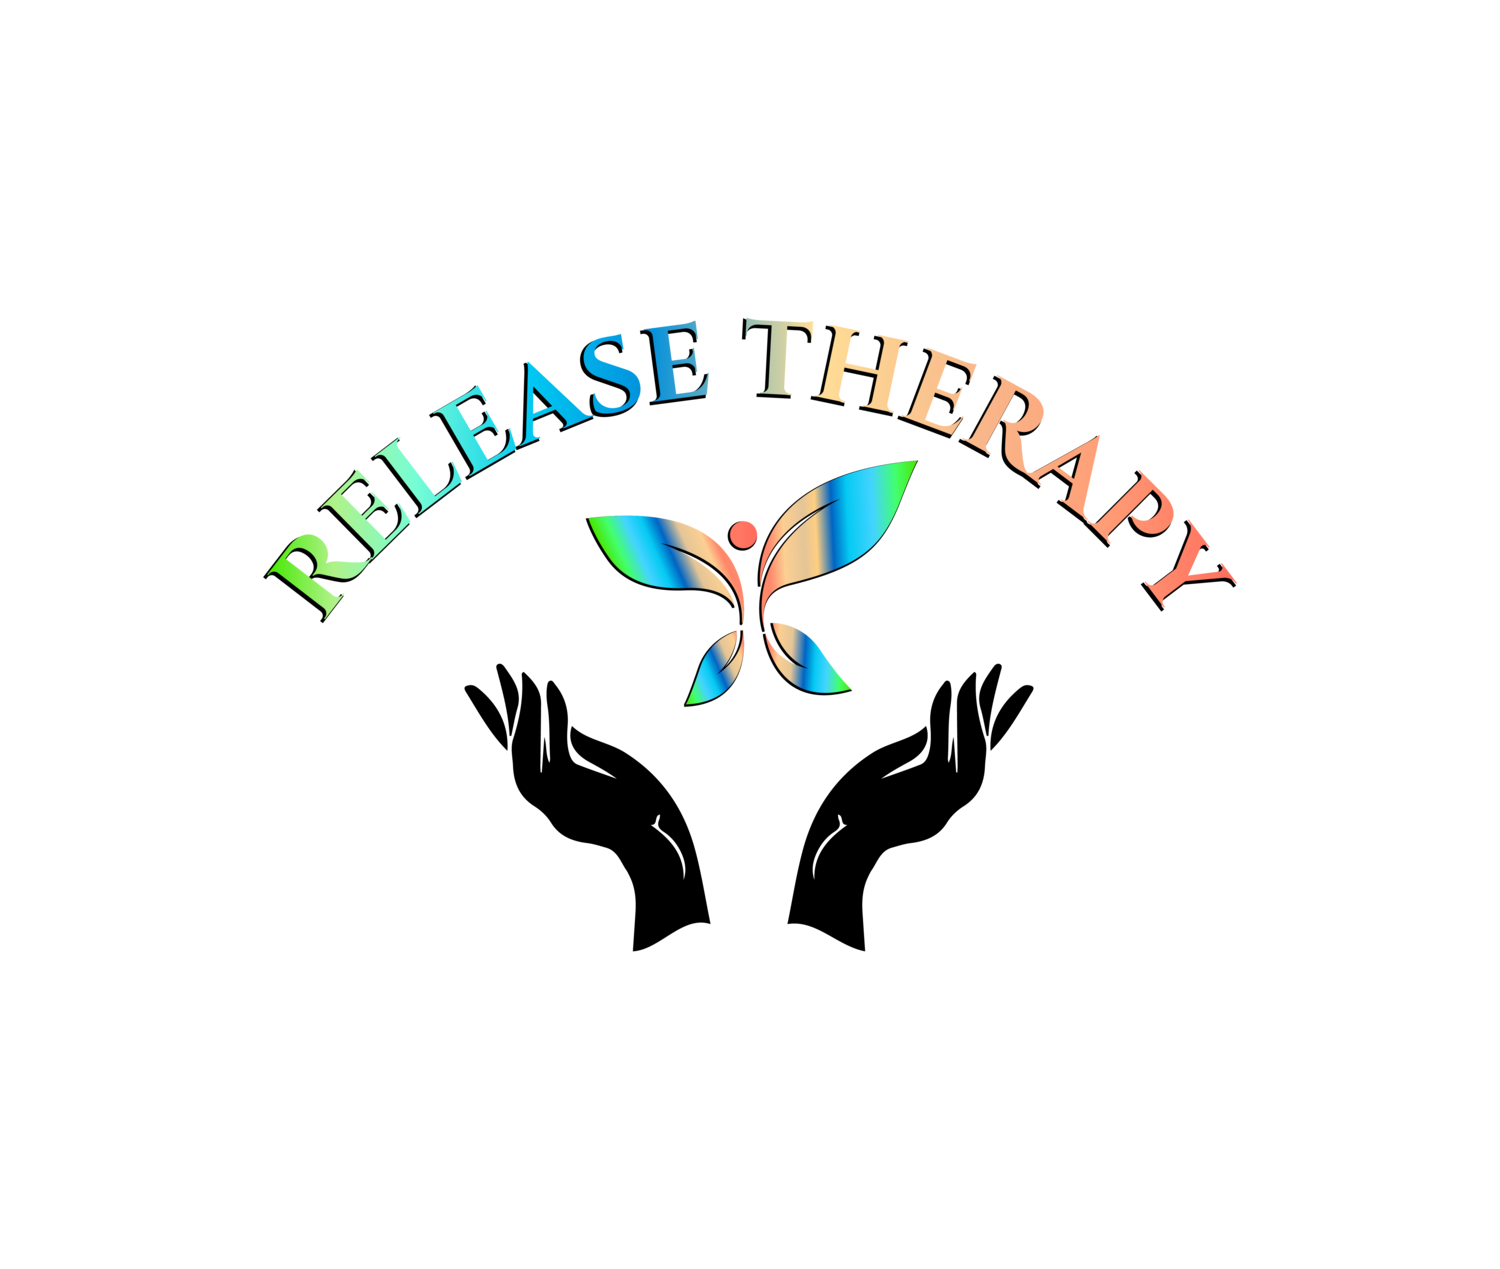 Release Therapy